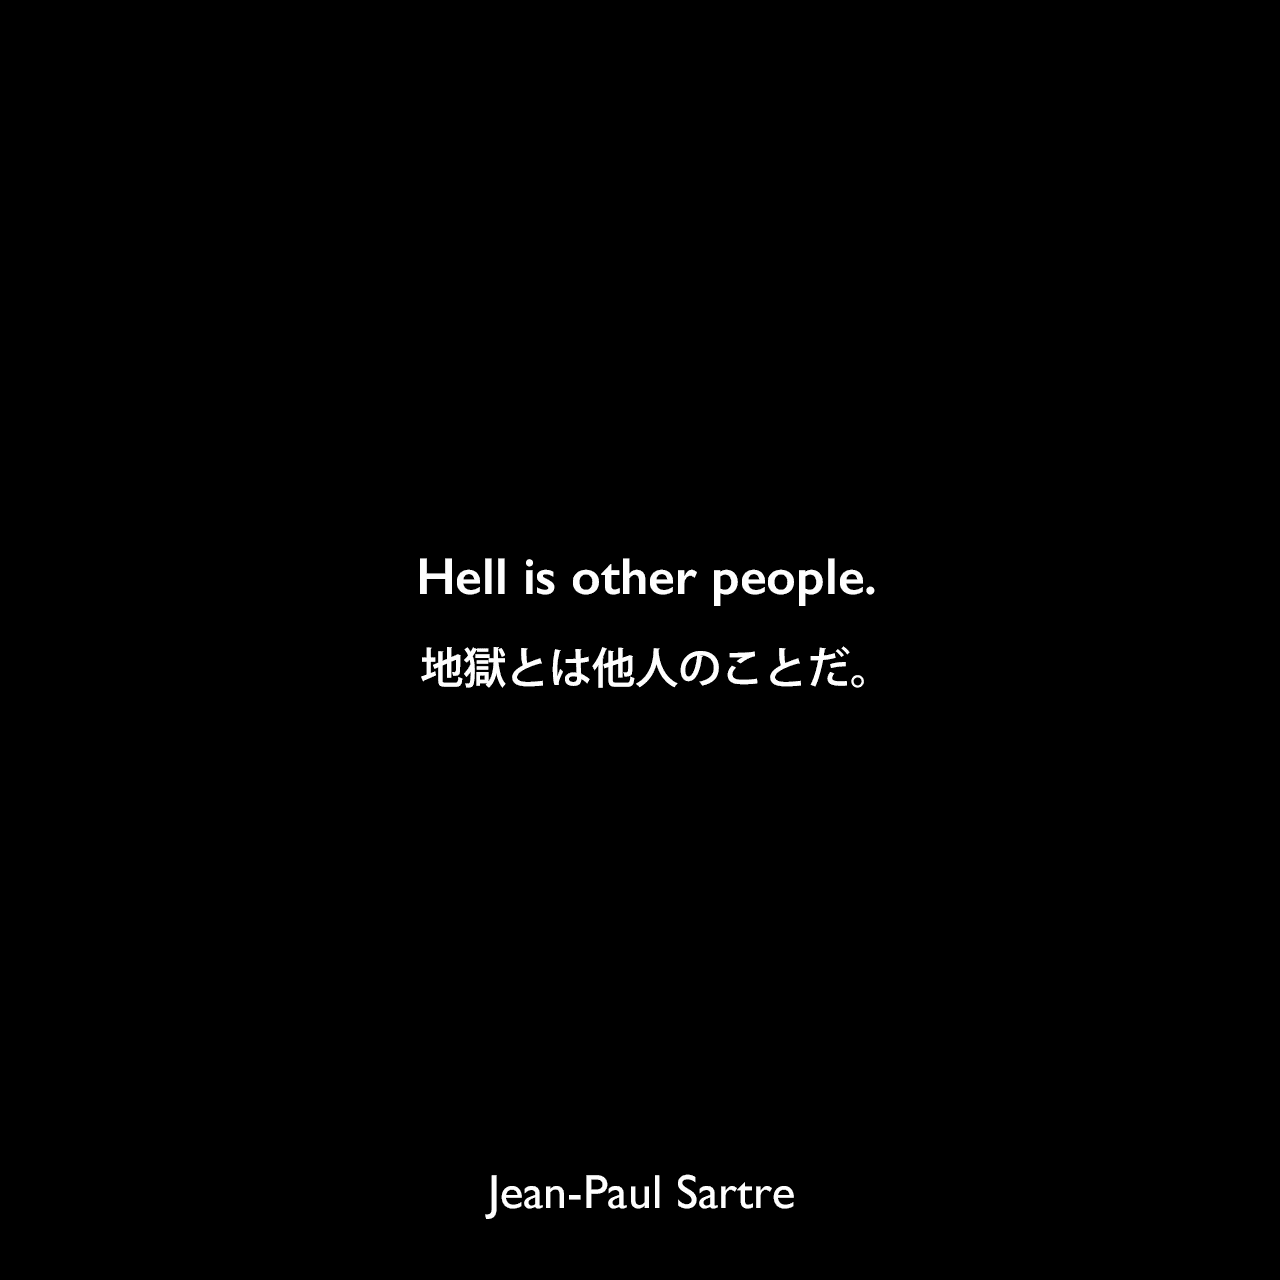 Hell is other people.地獄とは他人のことだ。Jean-Paul Sartre